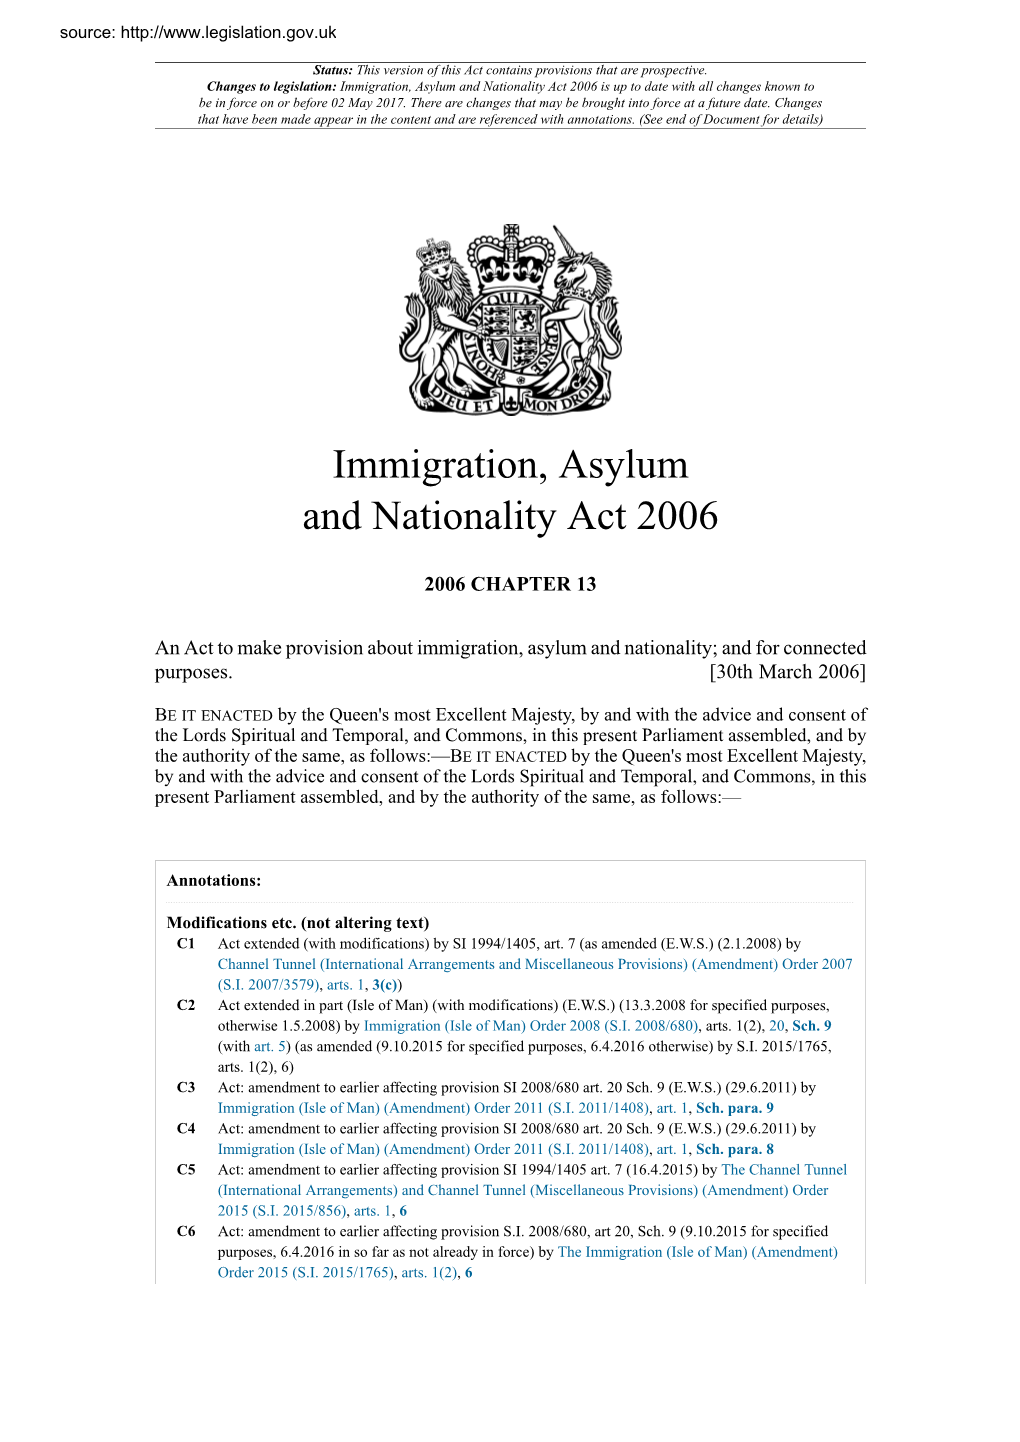 Immigration, Asylum and Nationality Act 2006 Is up to Date with All Changes Known to Be in Force on Or Before 02 May 2017